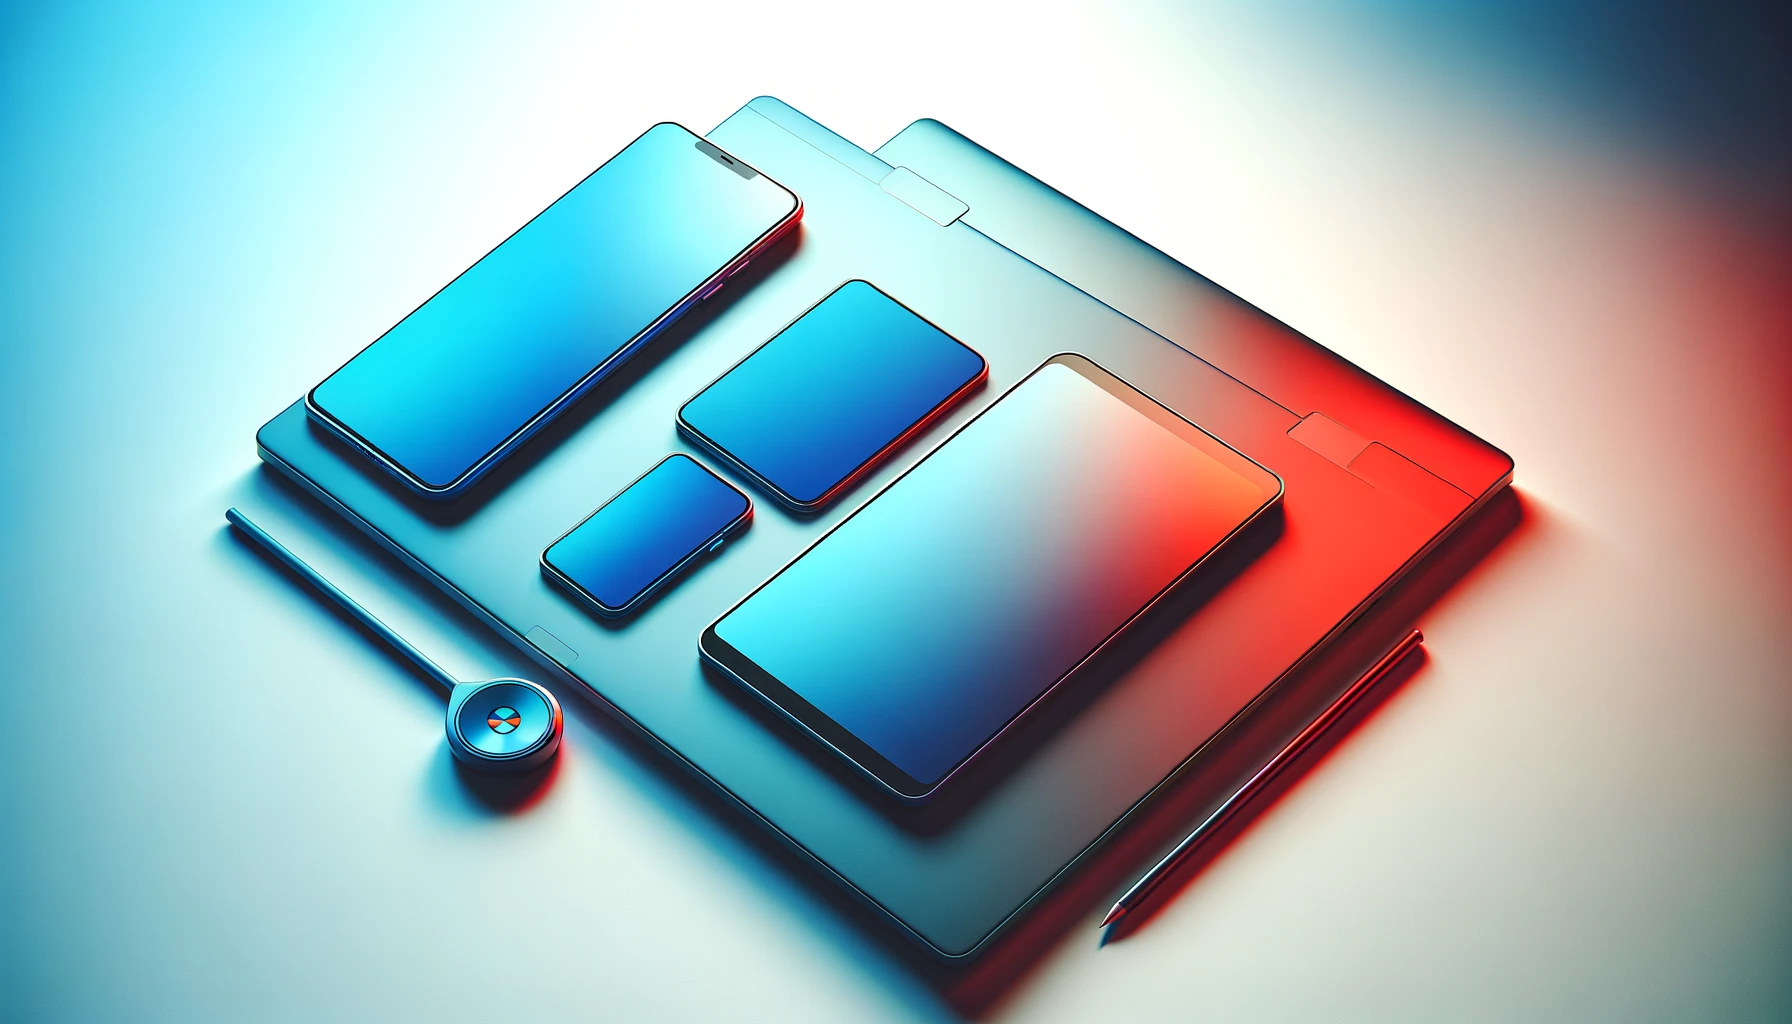 This artistic image features a sleek and modern arrangement of a smartphone, laptop, and tablet set against a clean white background. Each device is vibrantly colored, with the smartphone in blue, the laptop in red, and the tablet in green. The composition is minimalist, focusing on simplicity and elegance, with soft and even lighting that highlights the smooth surfaces and colorful edges of the devices. The overall aesthetic is visually appealing and modern.